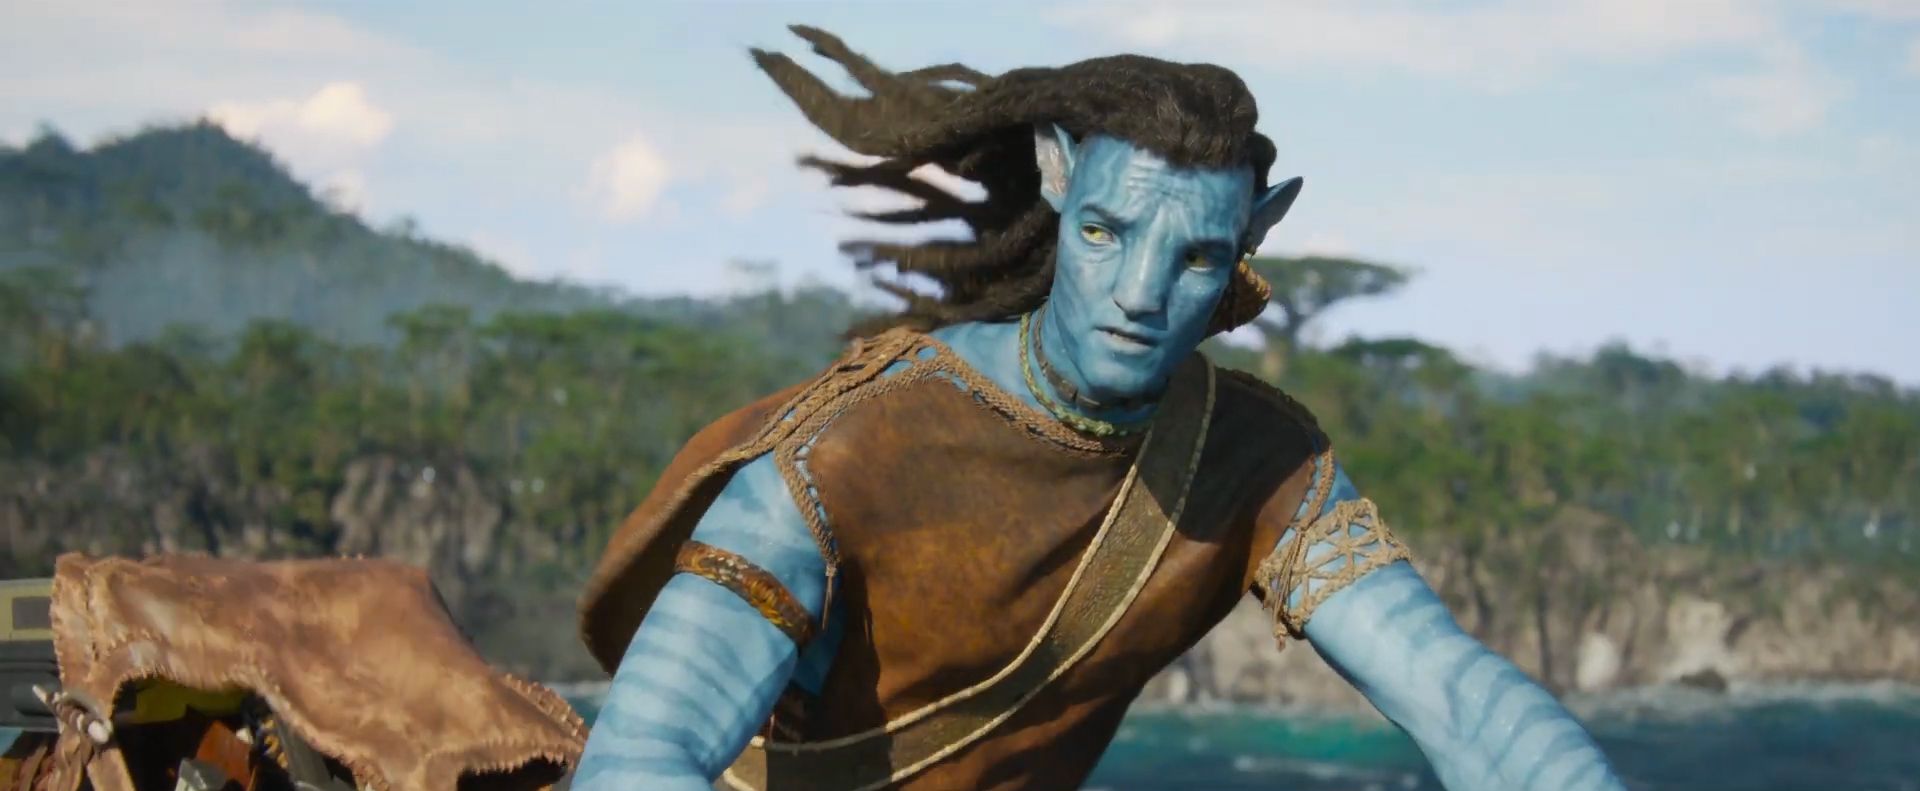 Chart Avatar Shows Up Late to Take the 2022 Box Office Crown  Statista